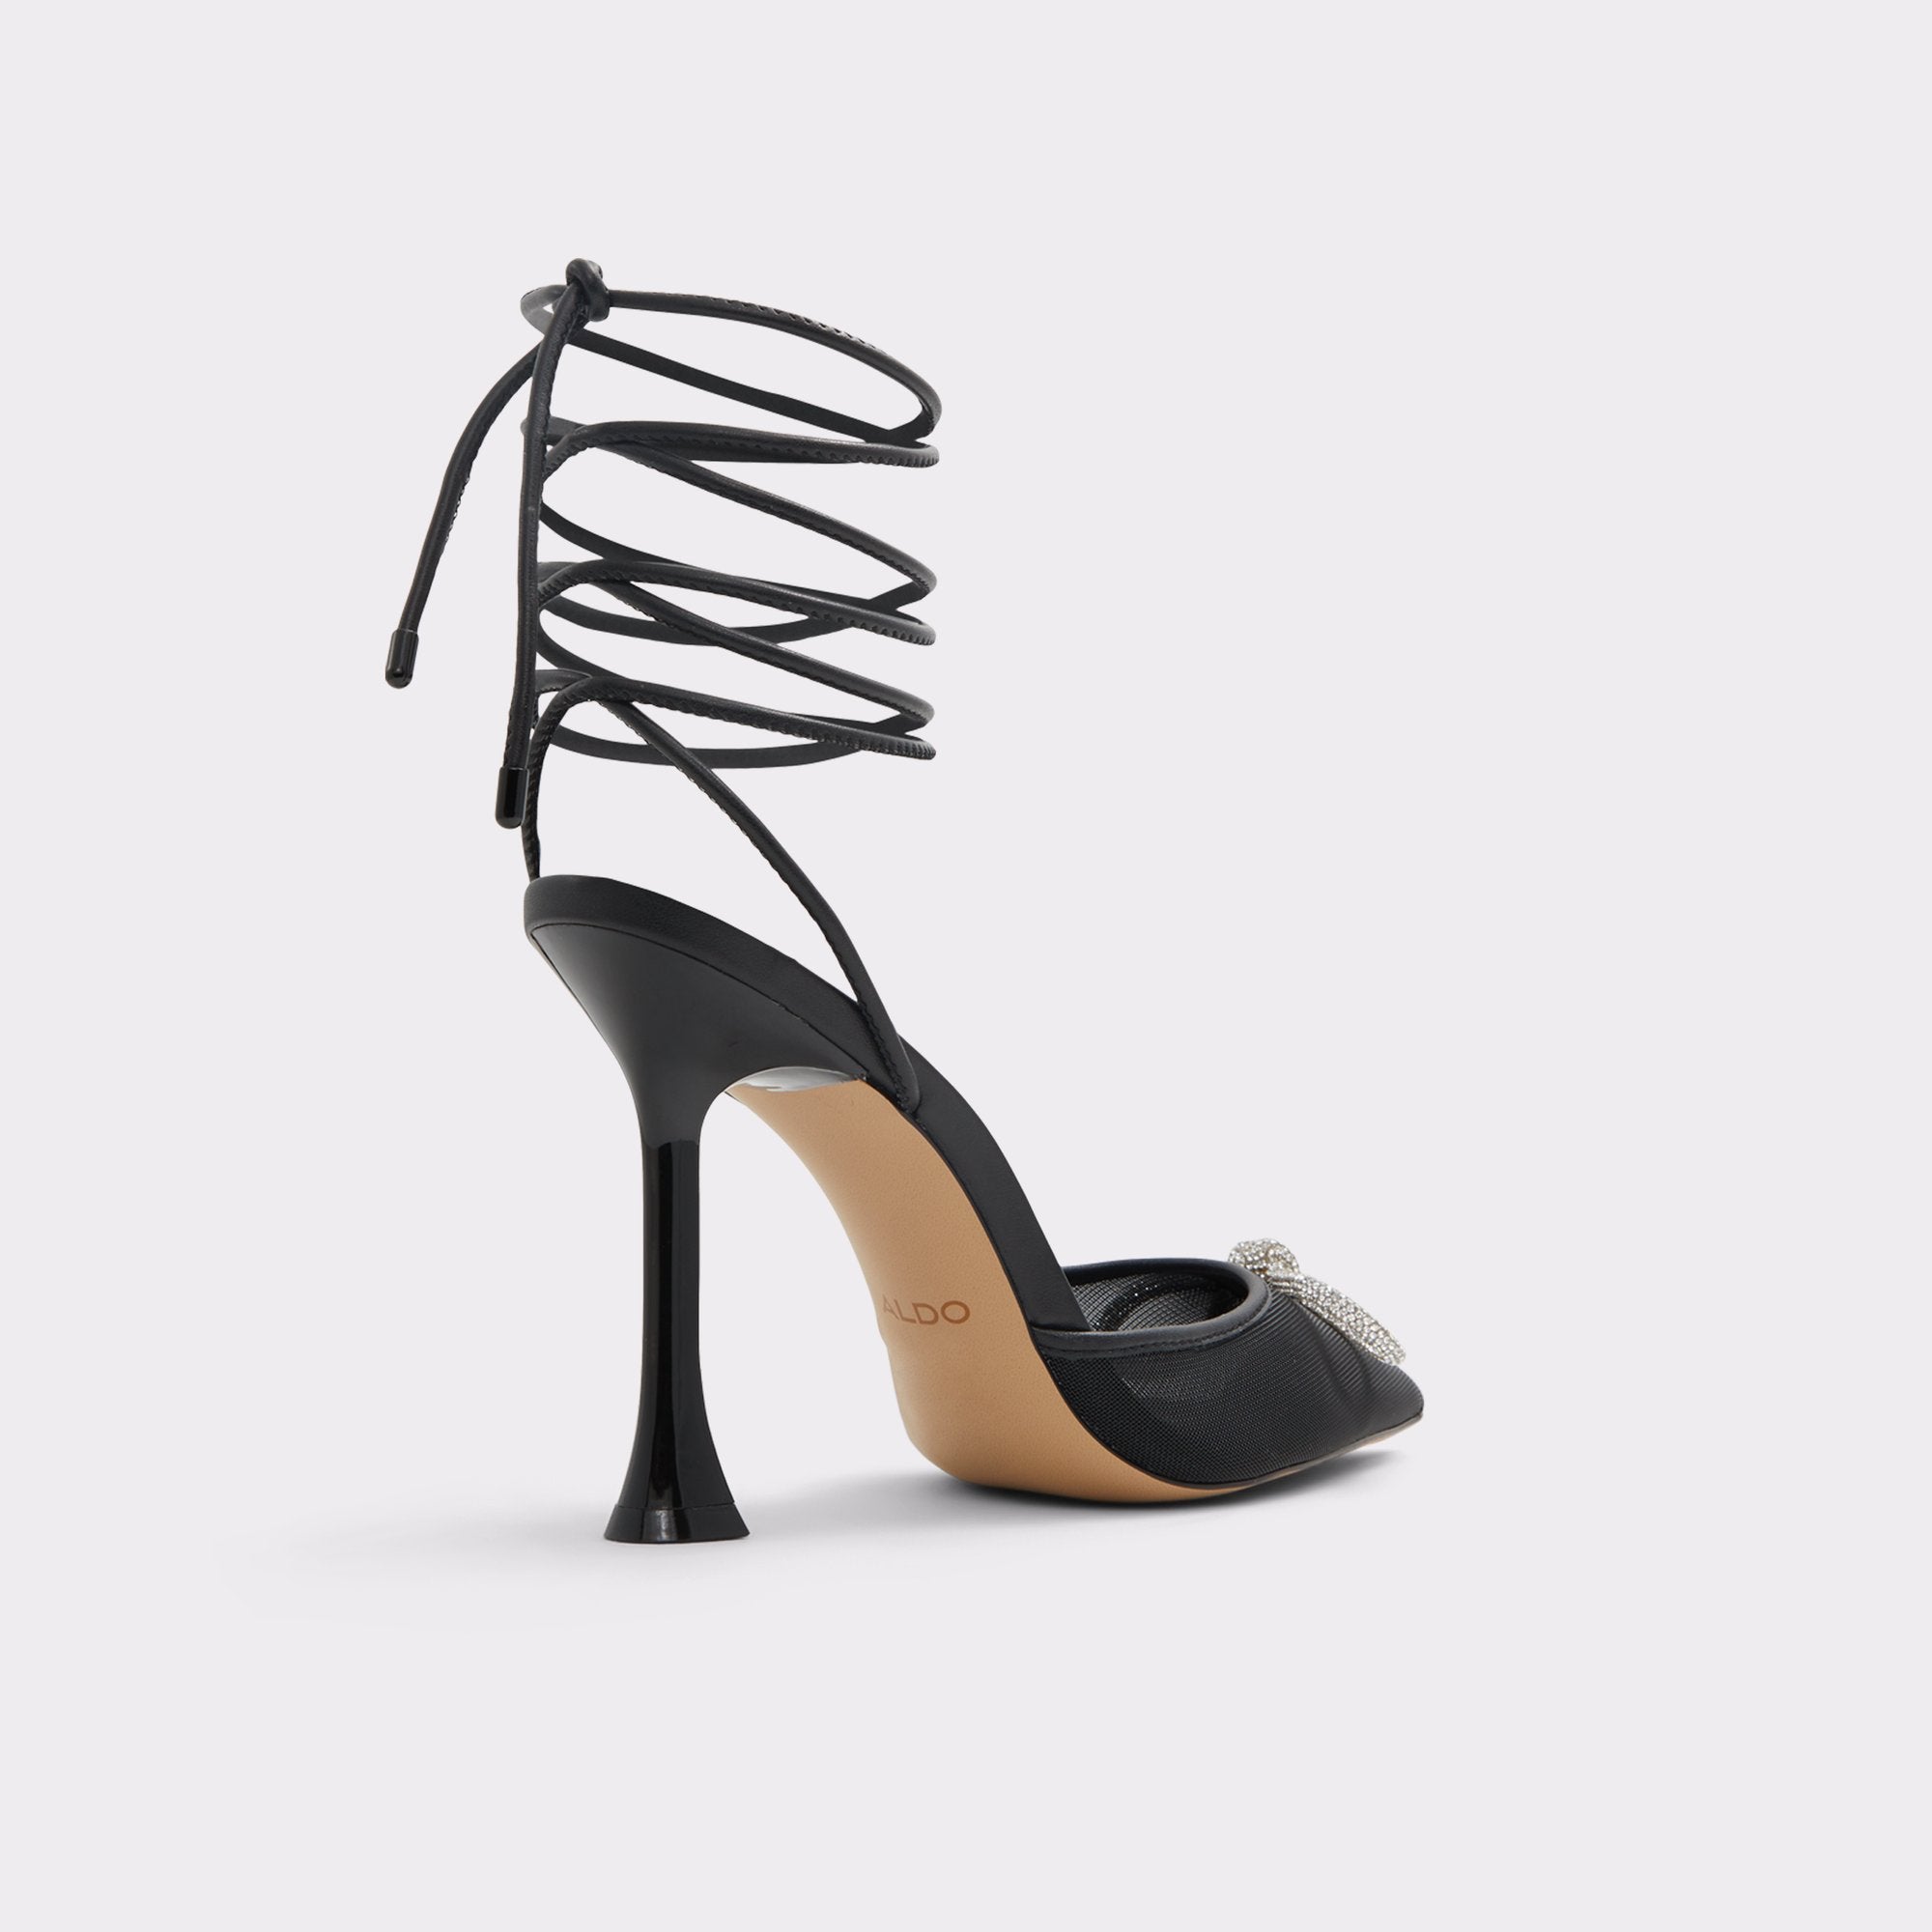 ALDO MESH BOW DETAIL LACE-UP HEELED PUMP IN BLACK